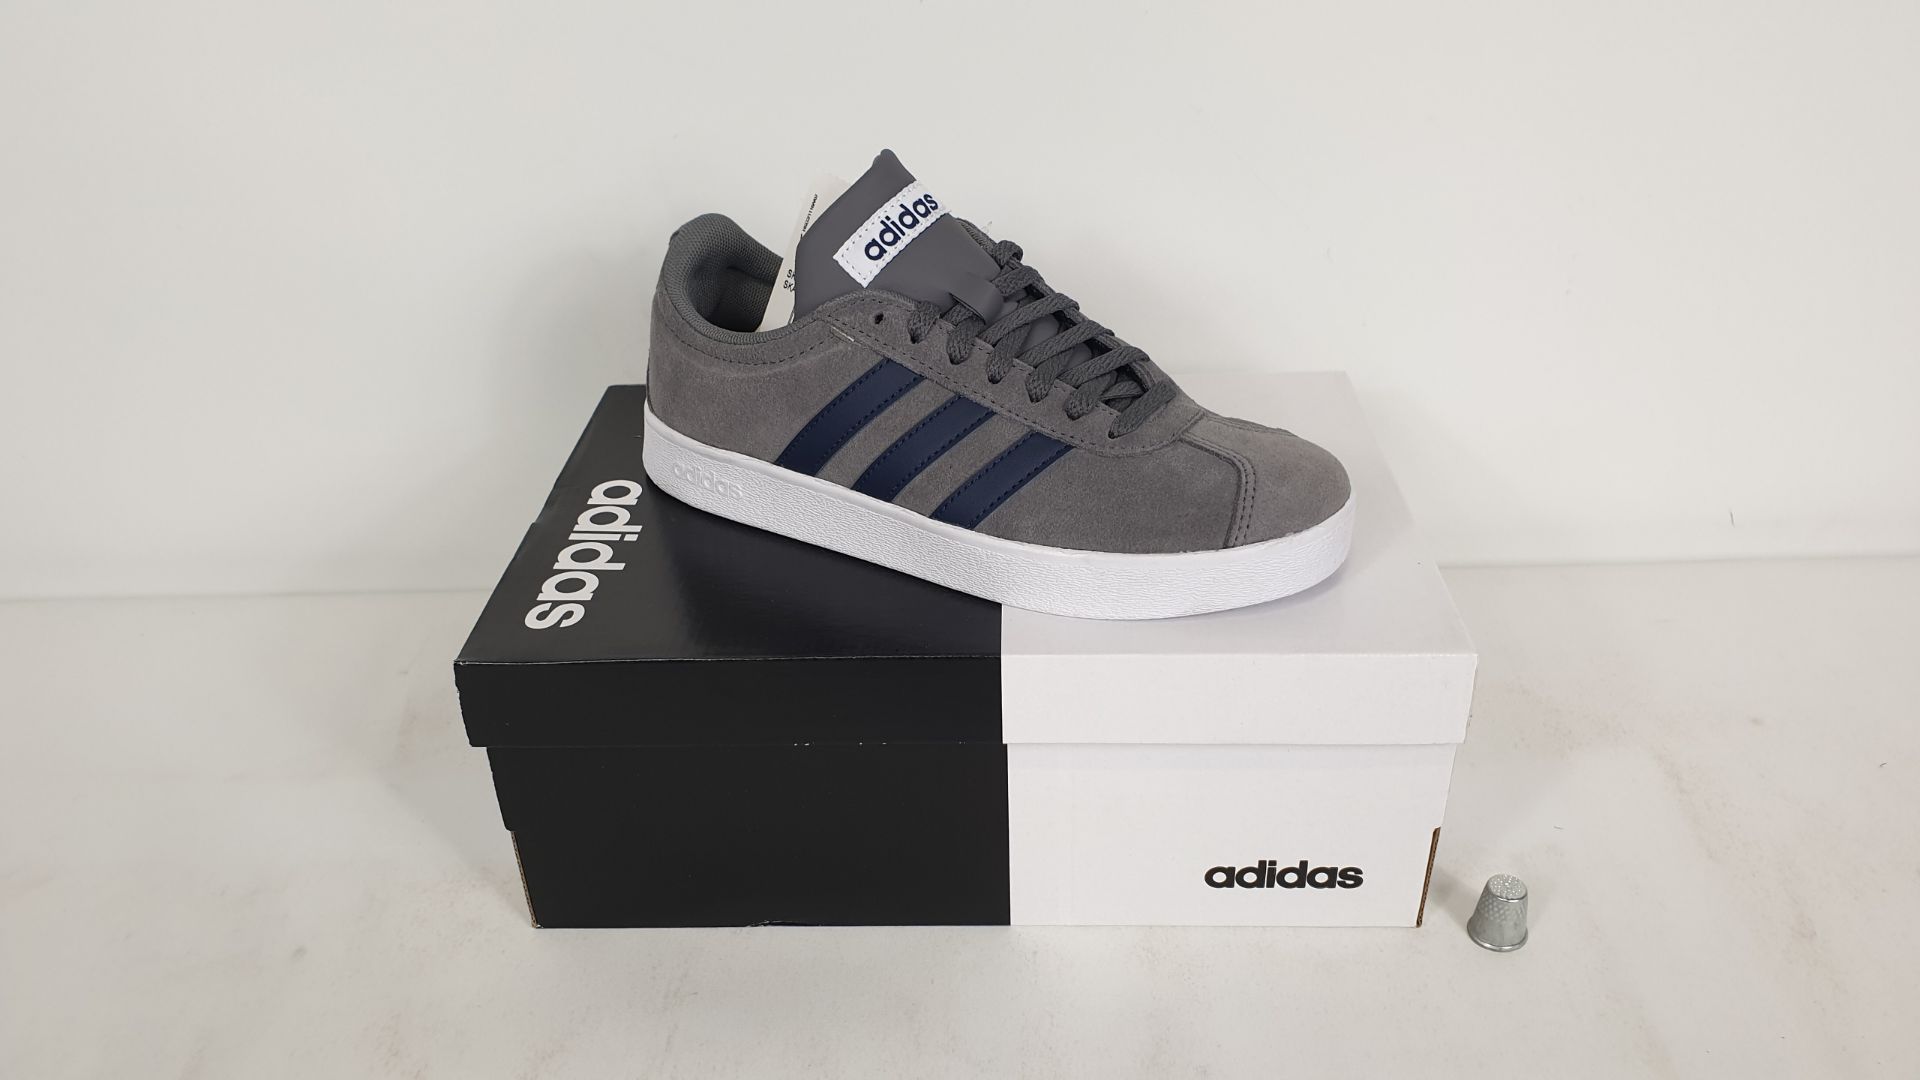 5 X PAIRS OF ADIDAS TRAINERS VL COURT 2.0 GREY / BLUE SIZE 3.5 - BRAND NEW AND BOXED